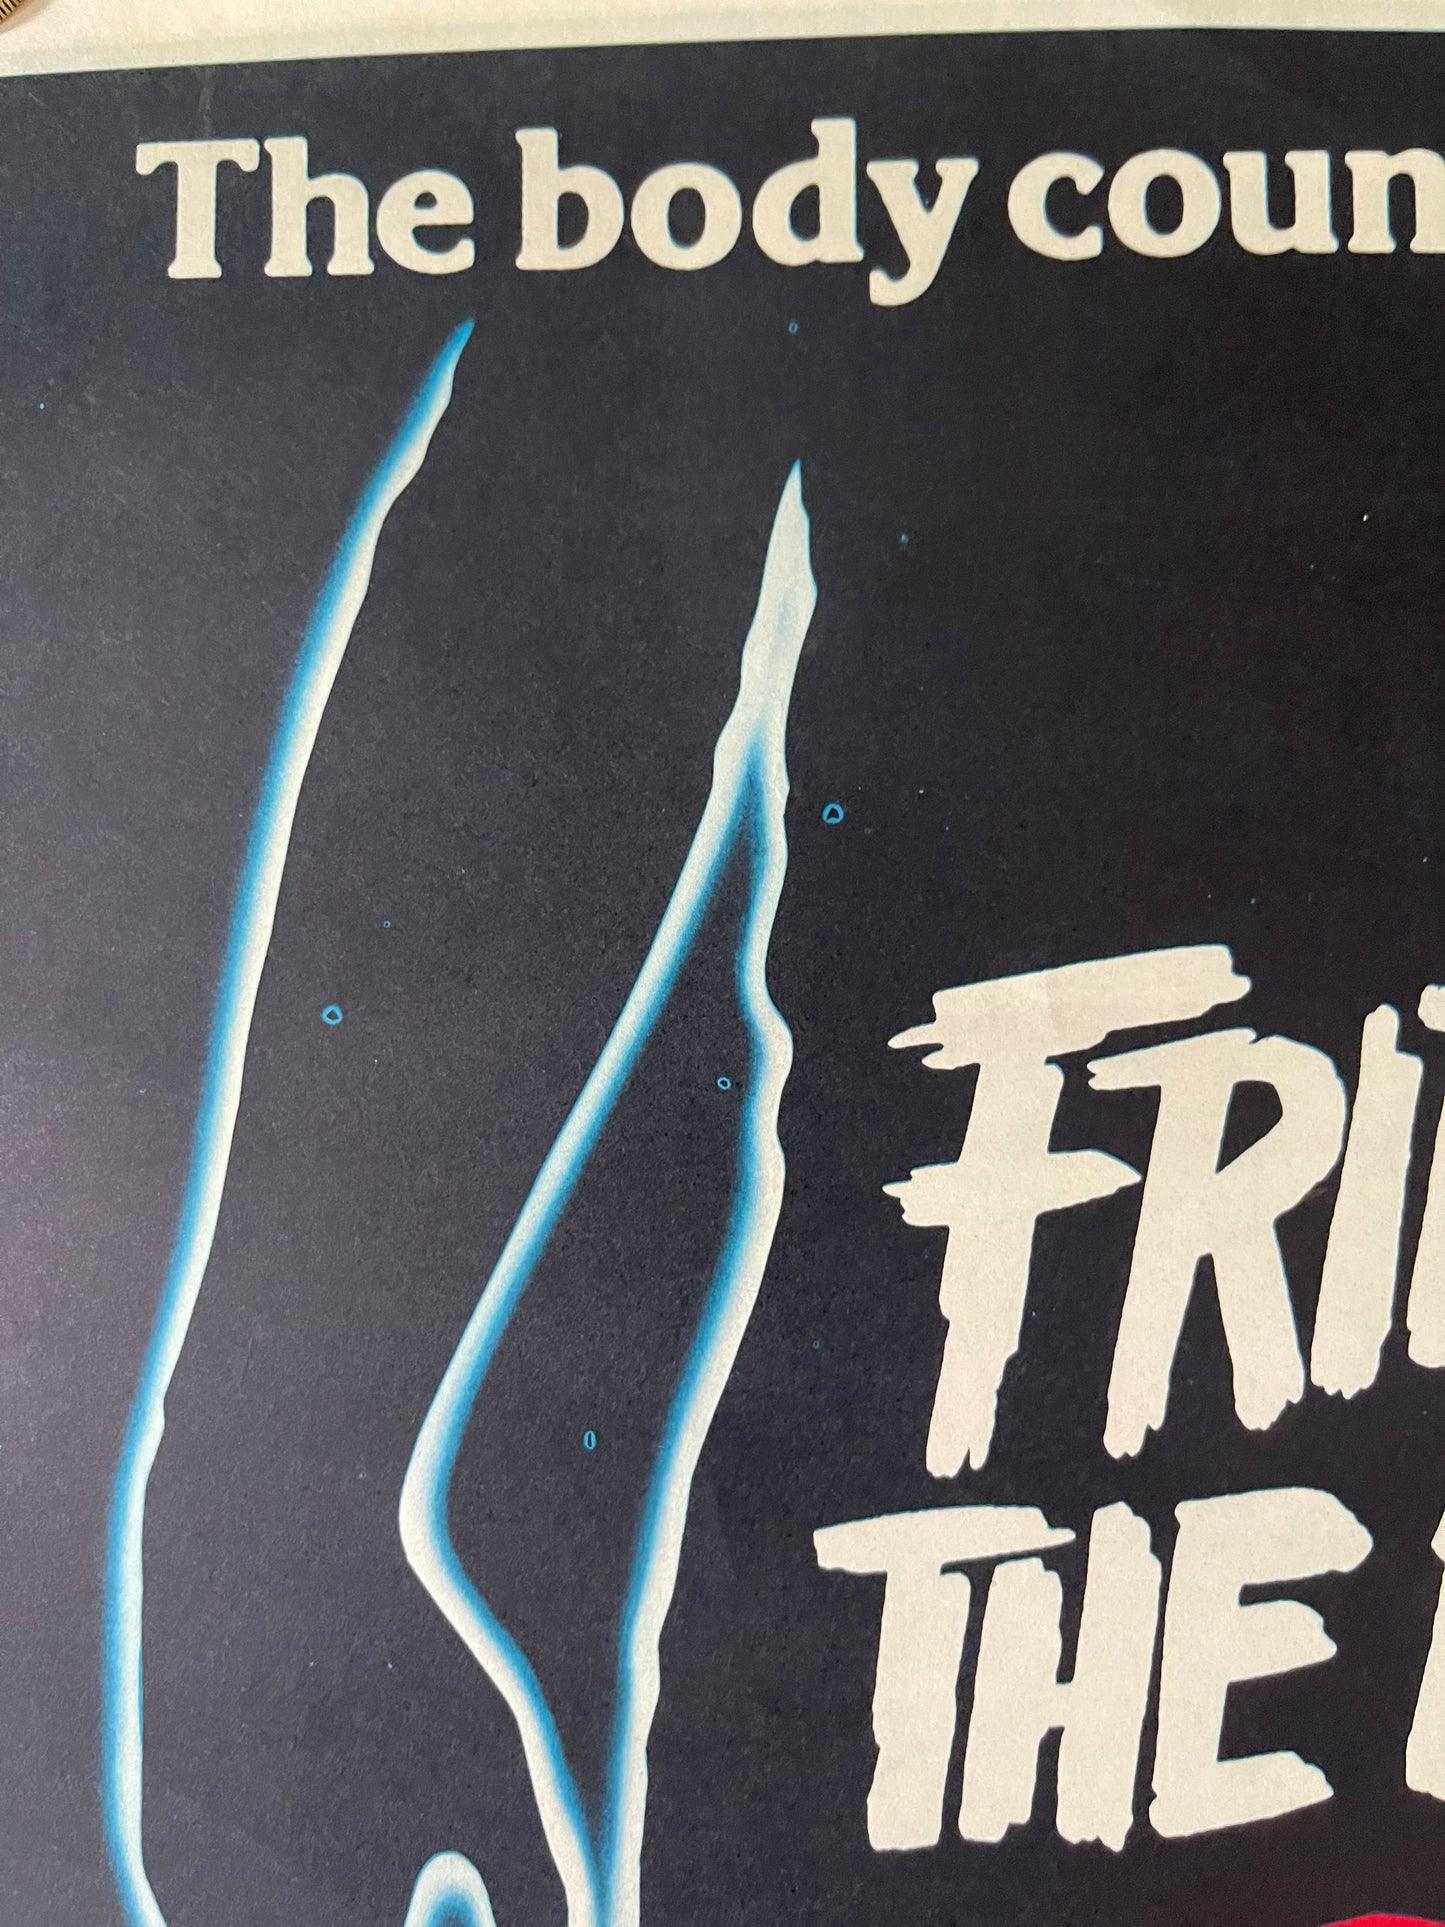 Friday the 13th Part 2 (1981) - Daybill